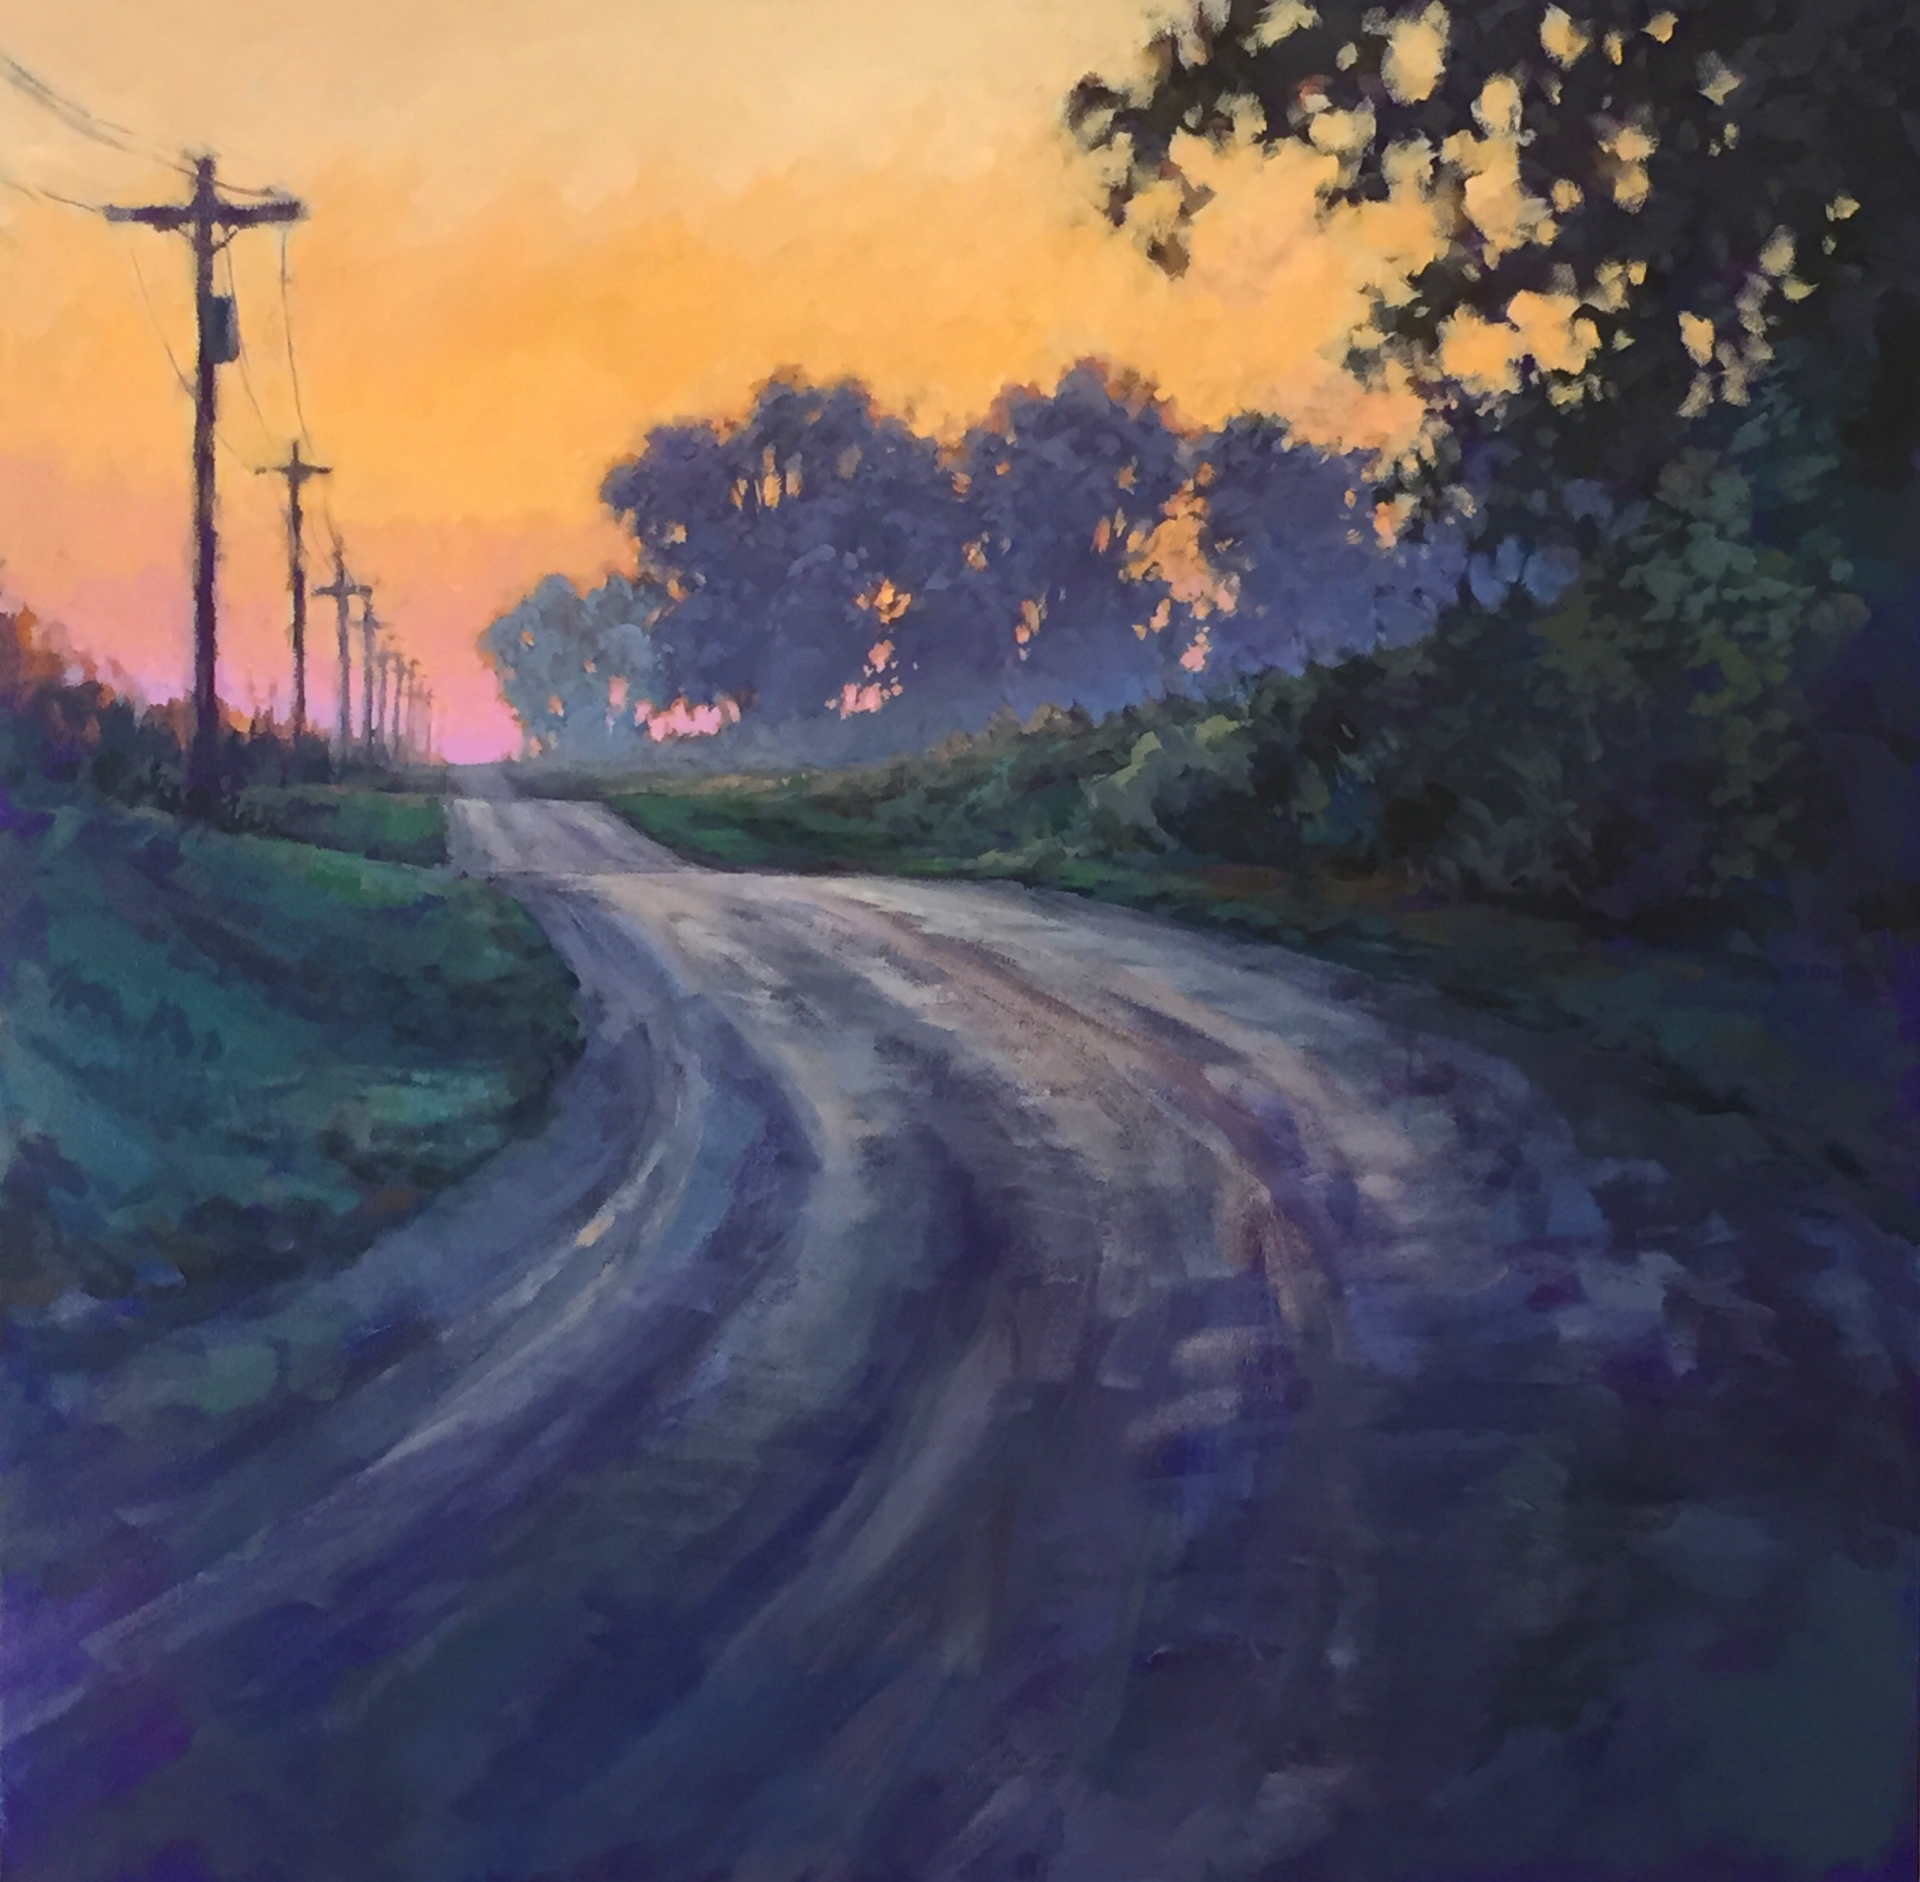 acrylic painting of an empty road with many trees